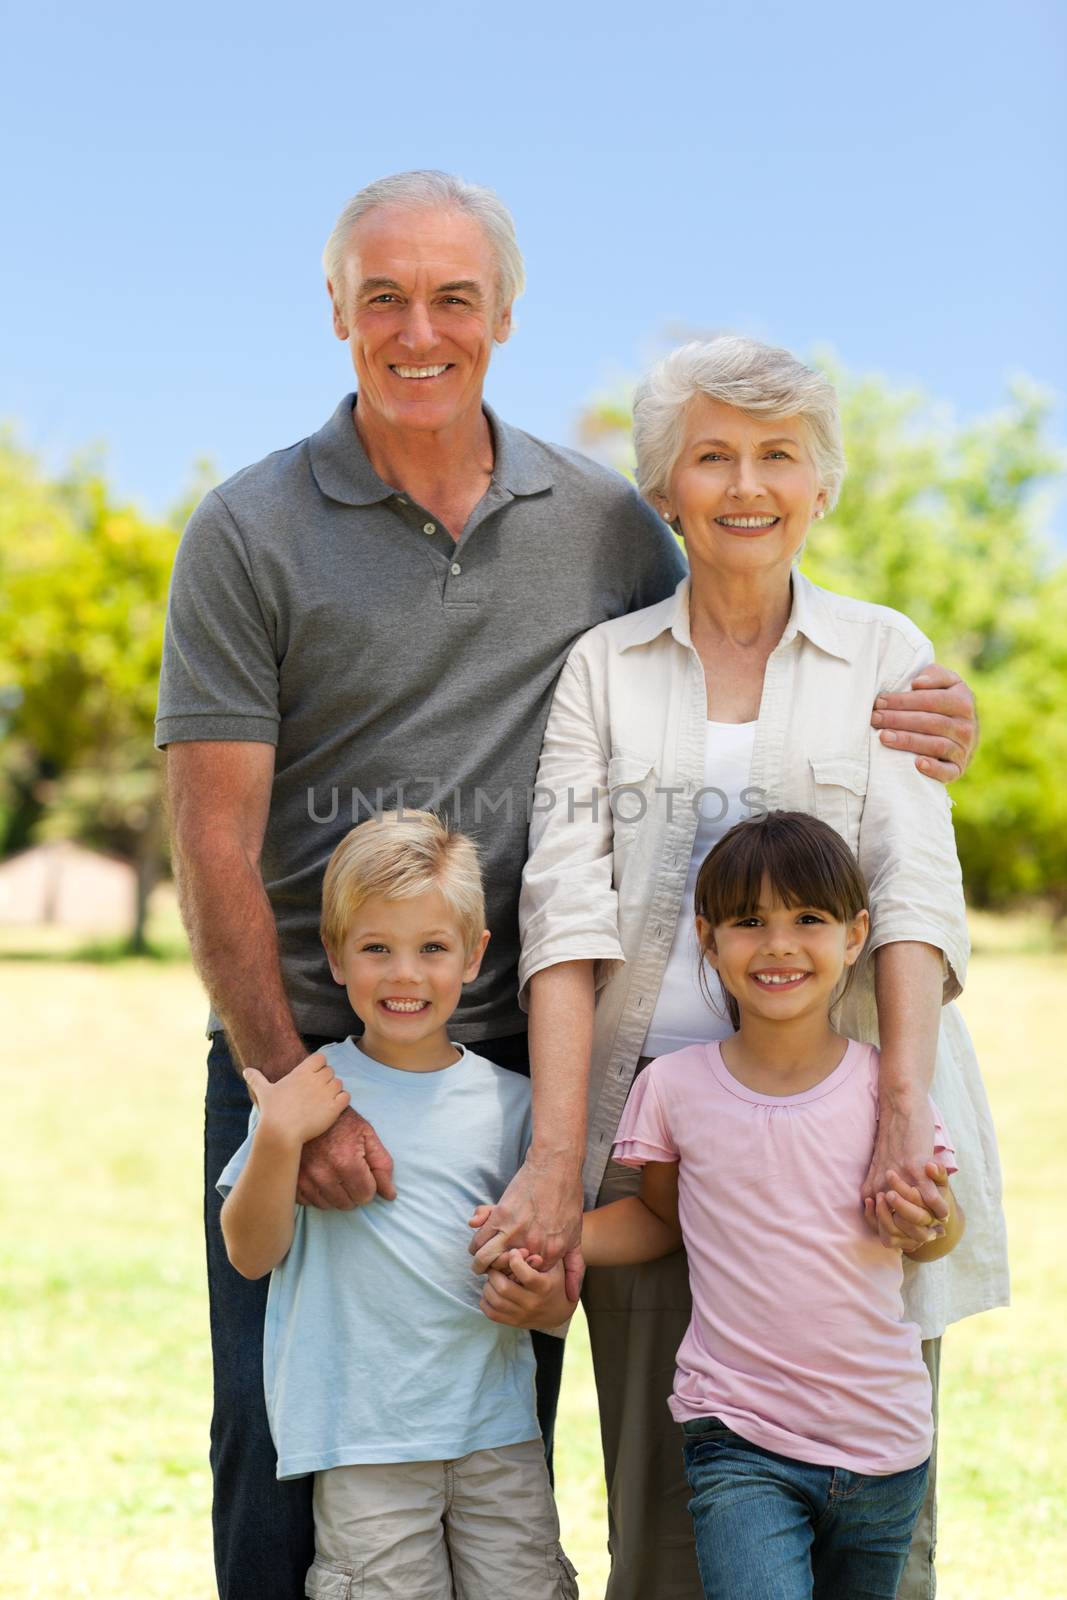 Grandparents with their grandchildren in the park